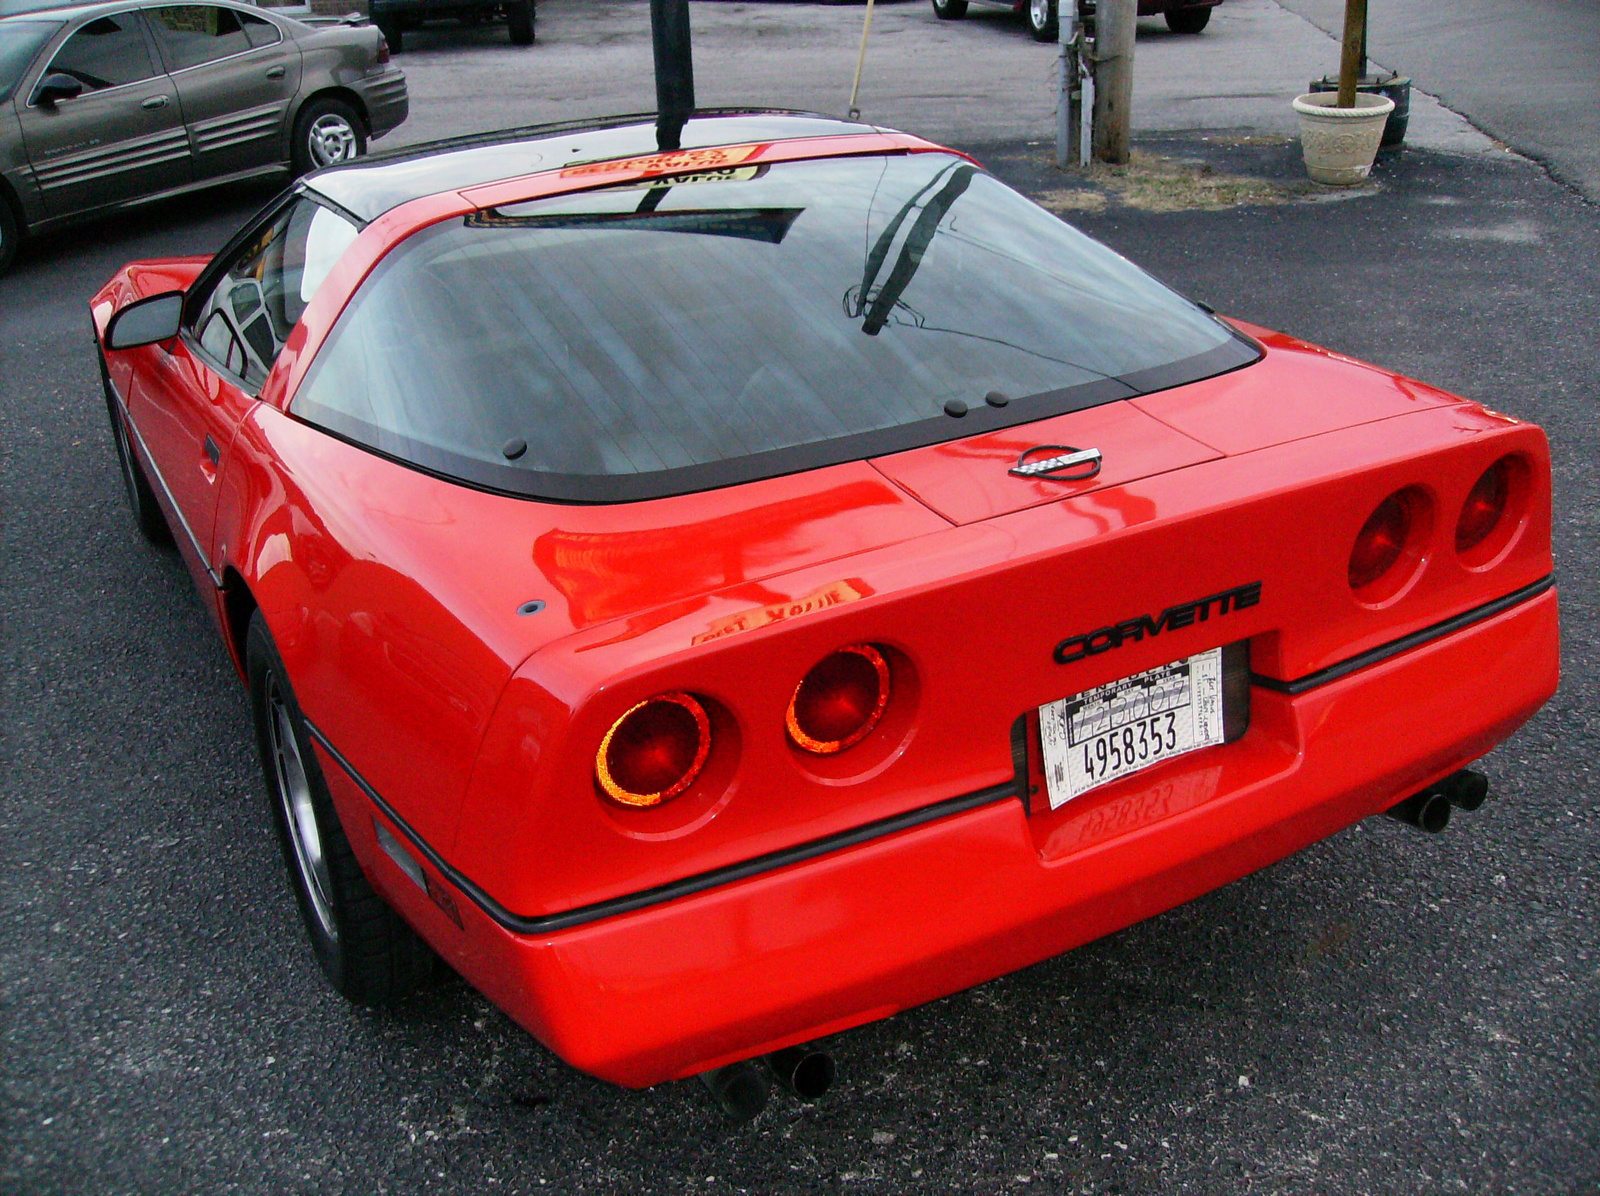 Just like the C3 was different from the C2, the C4 Corvette was a huge depa...